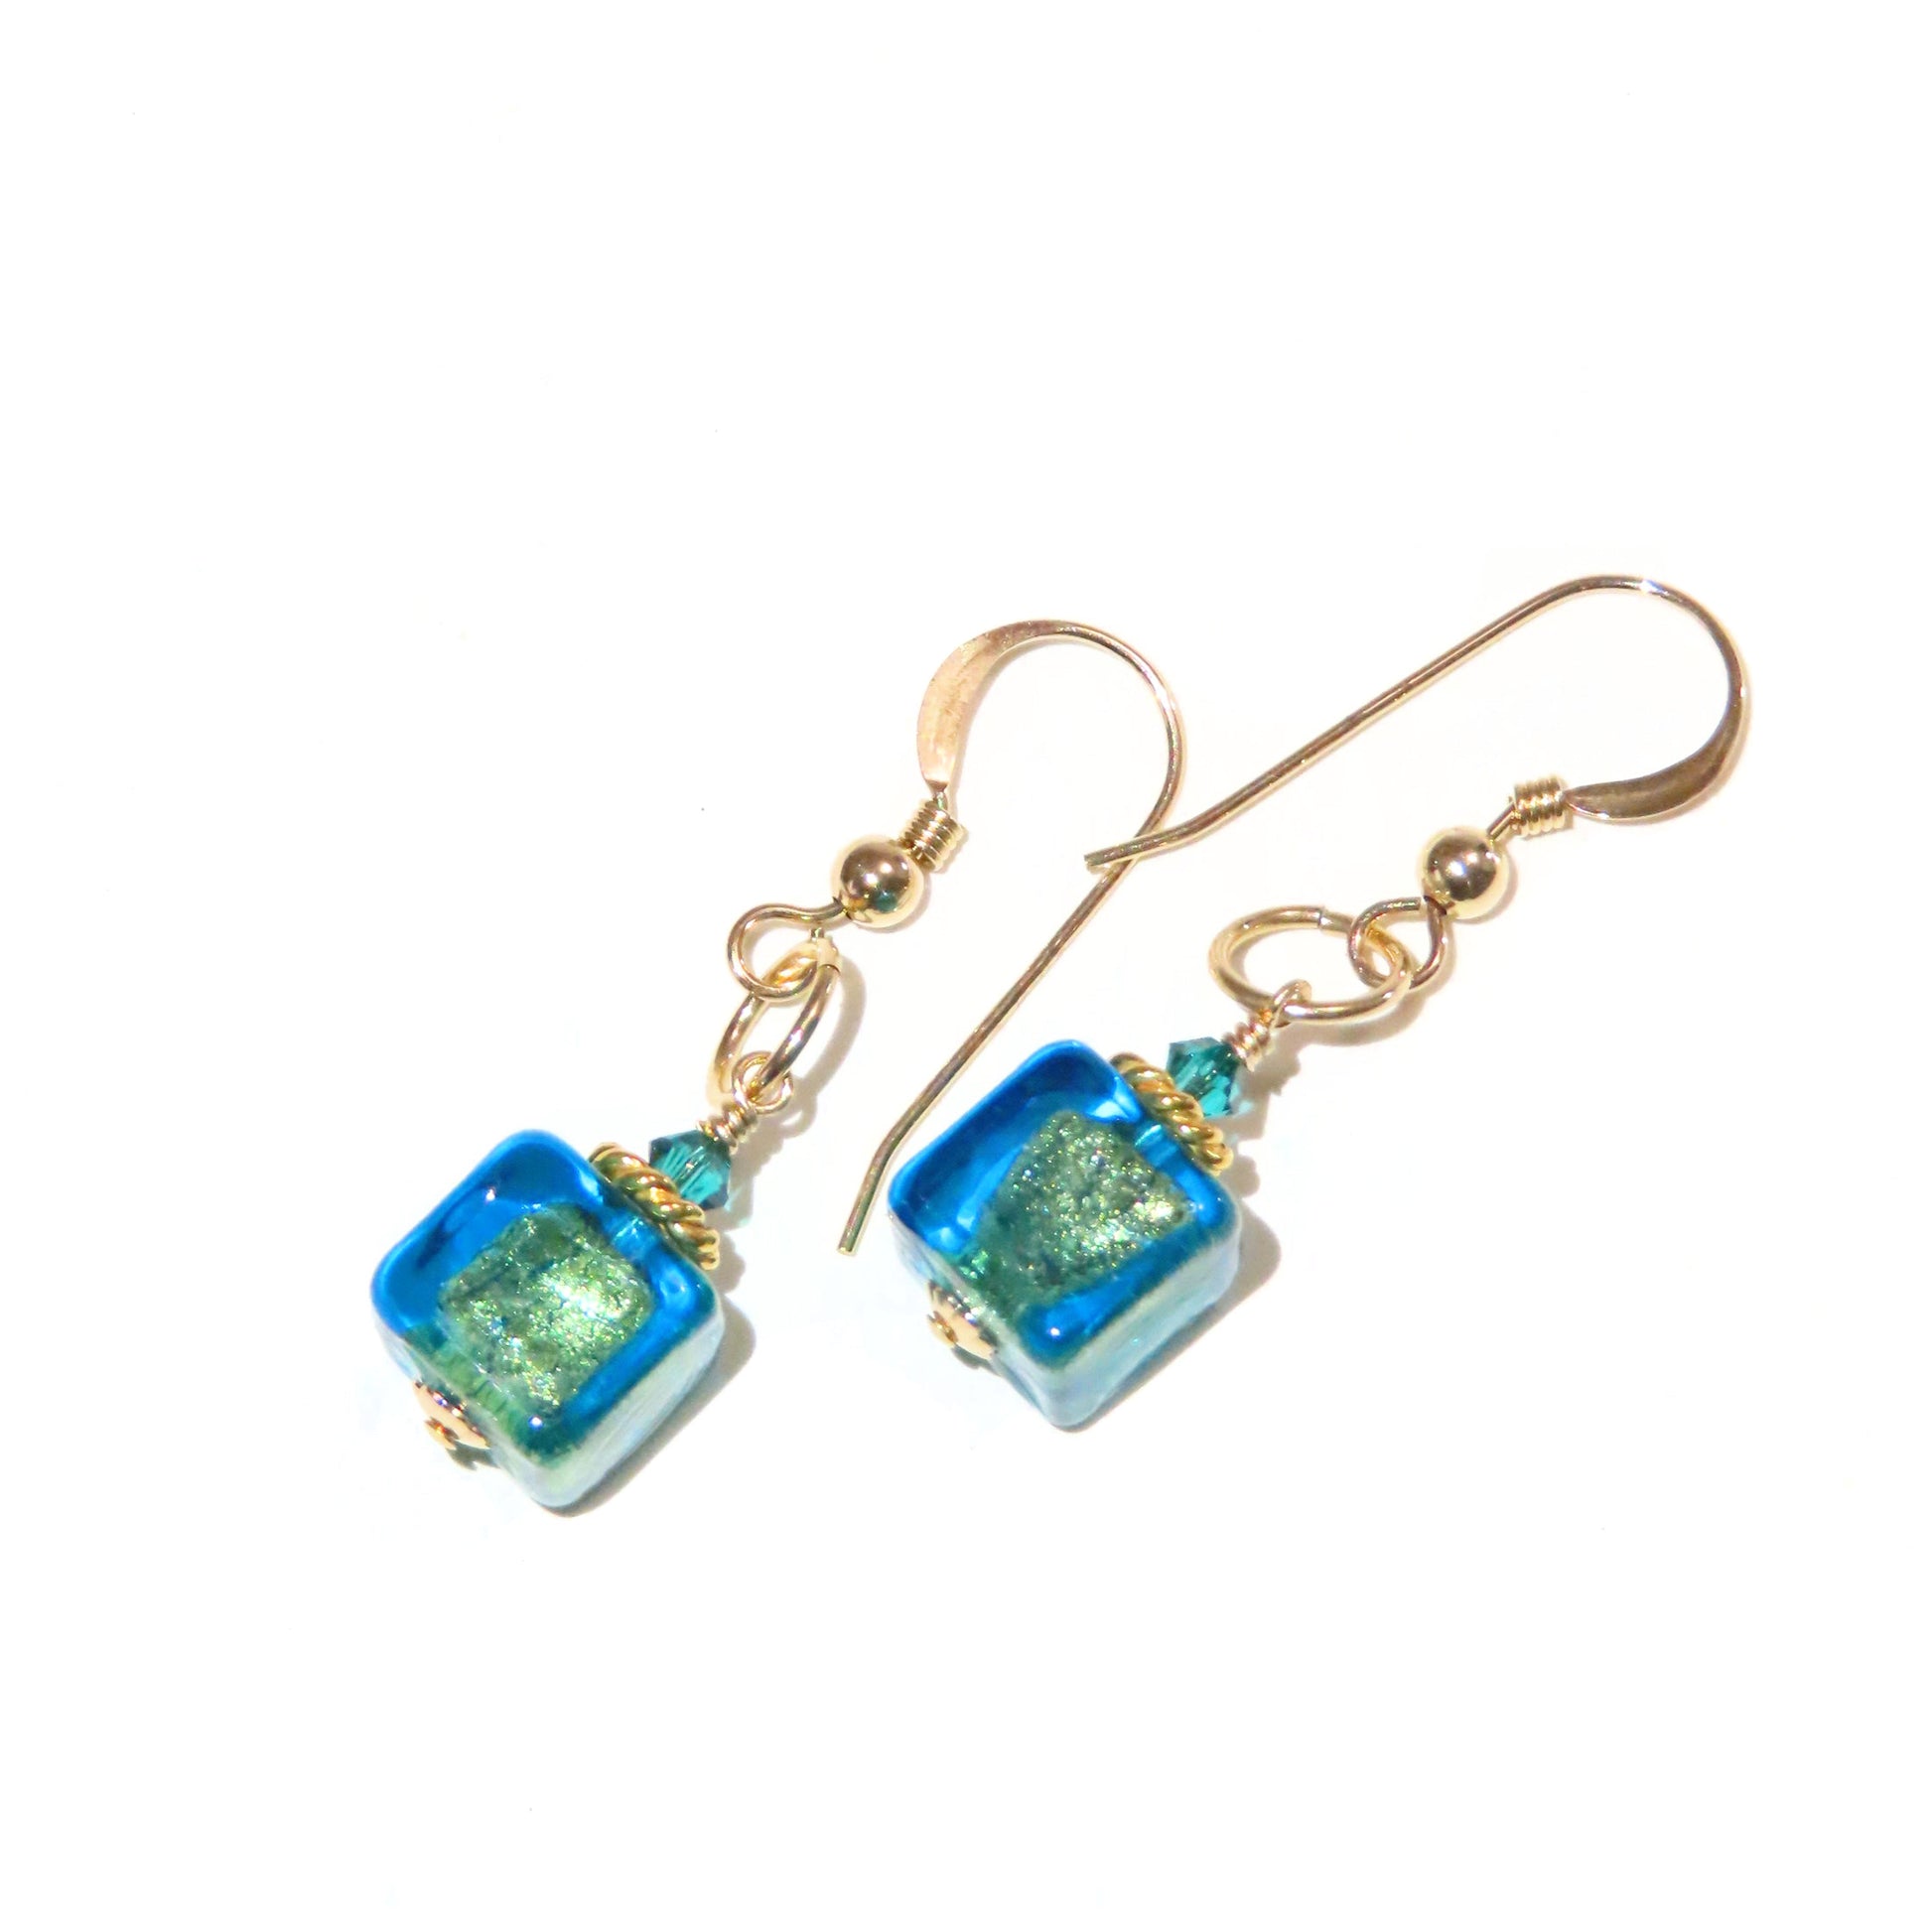 a pair of blue and green glass earrings